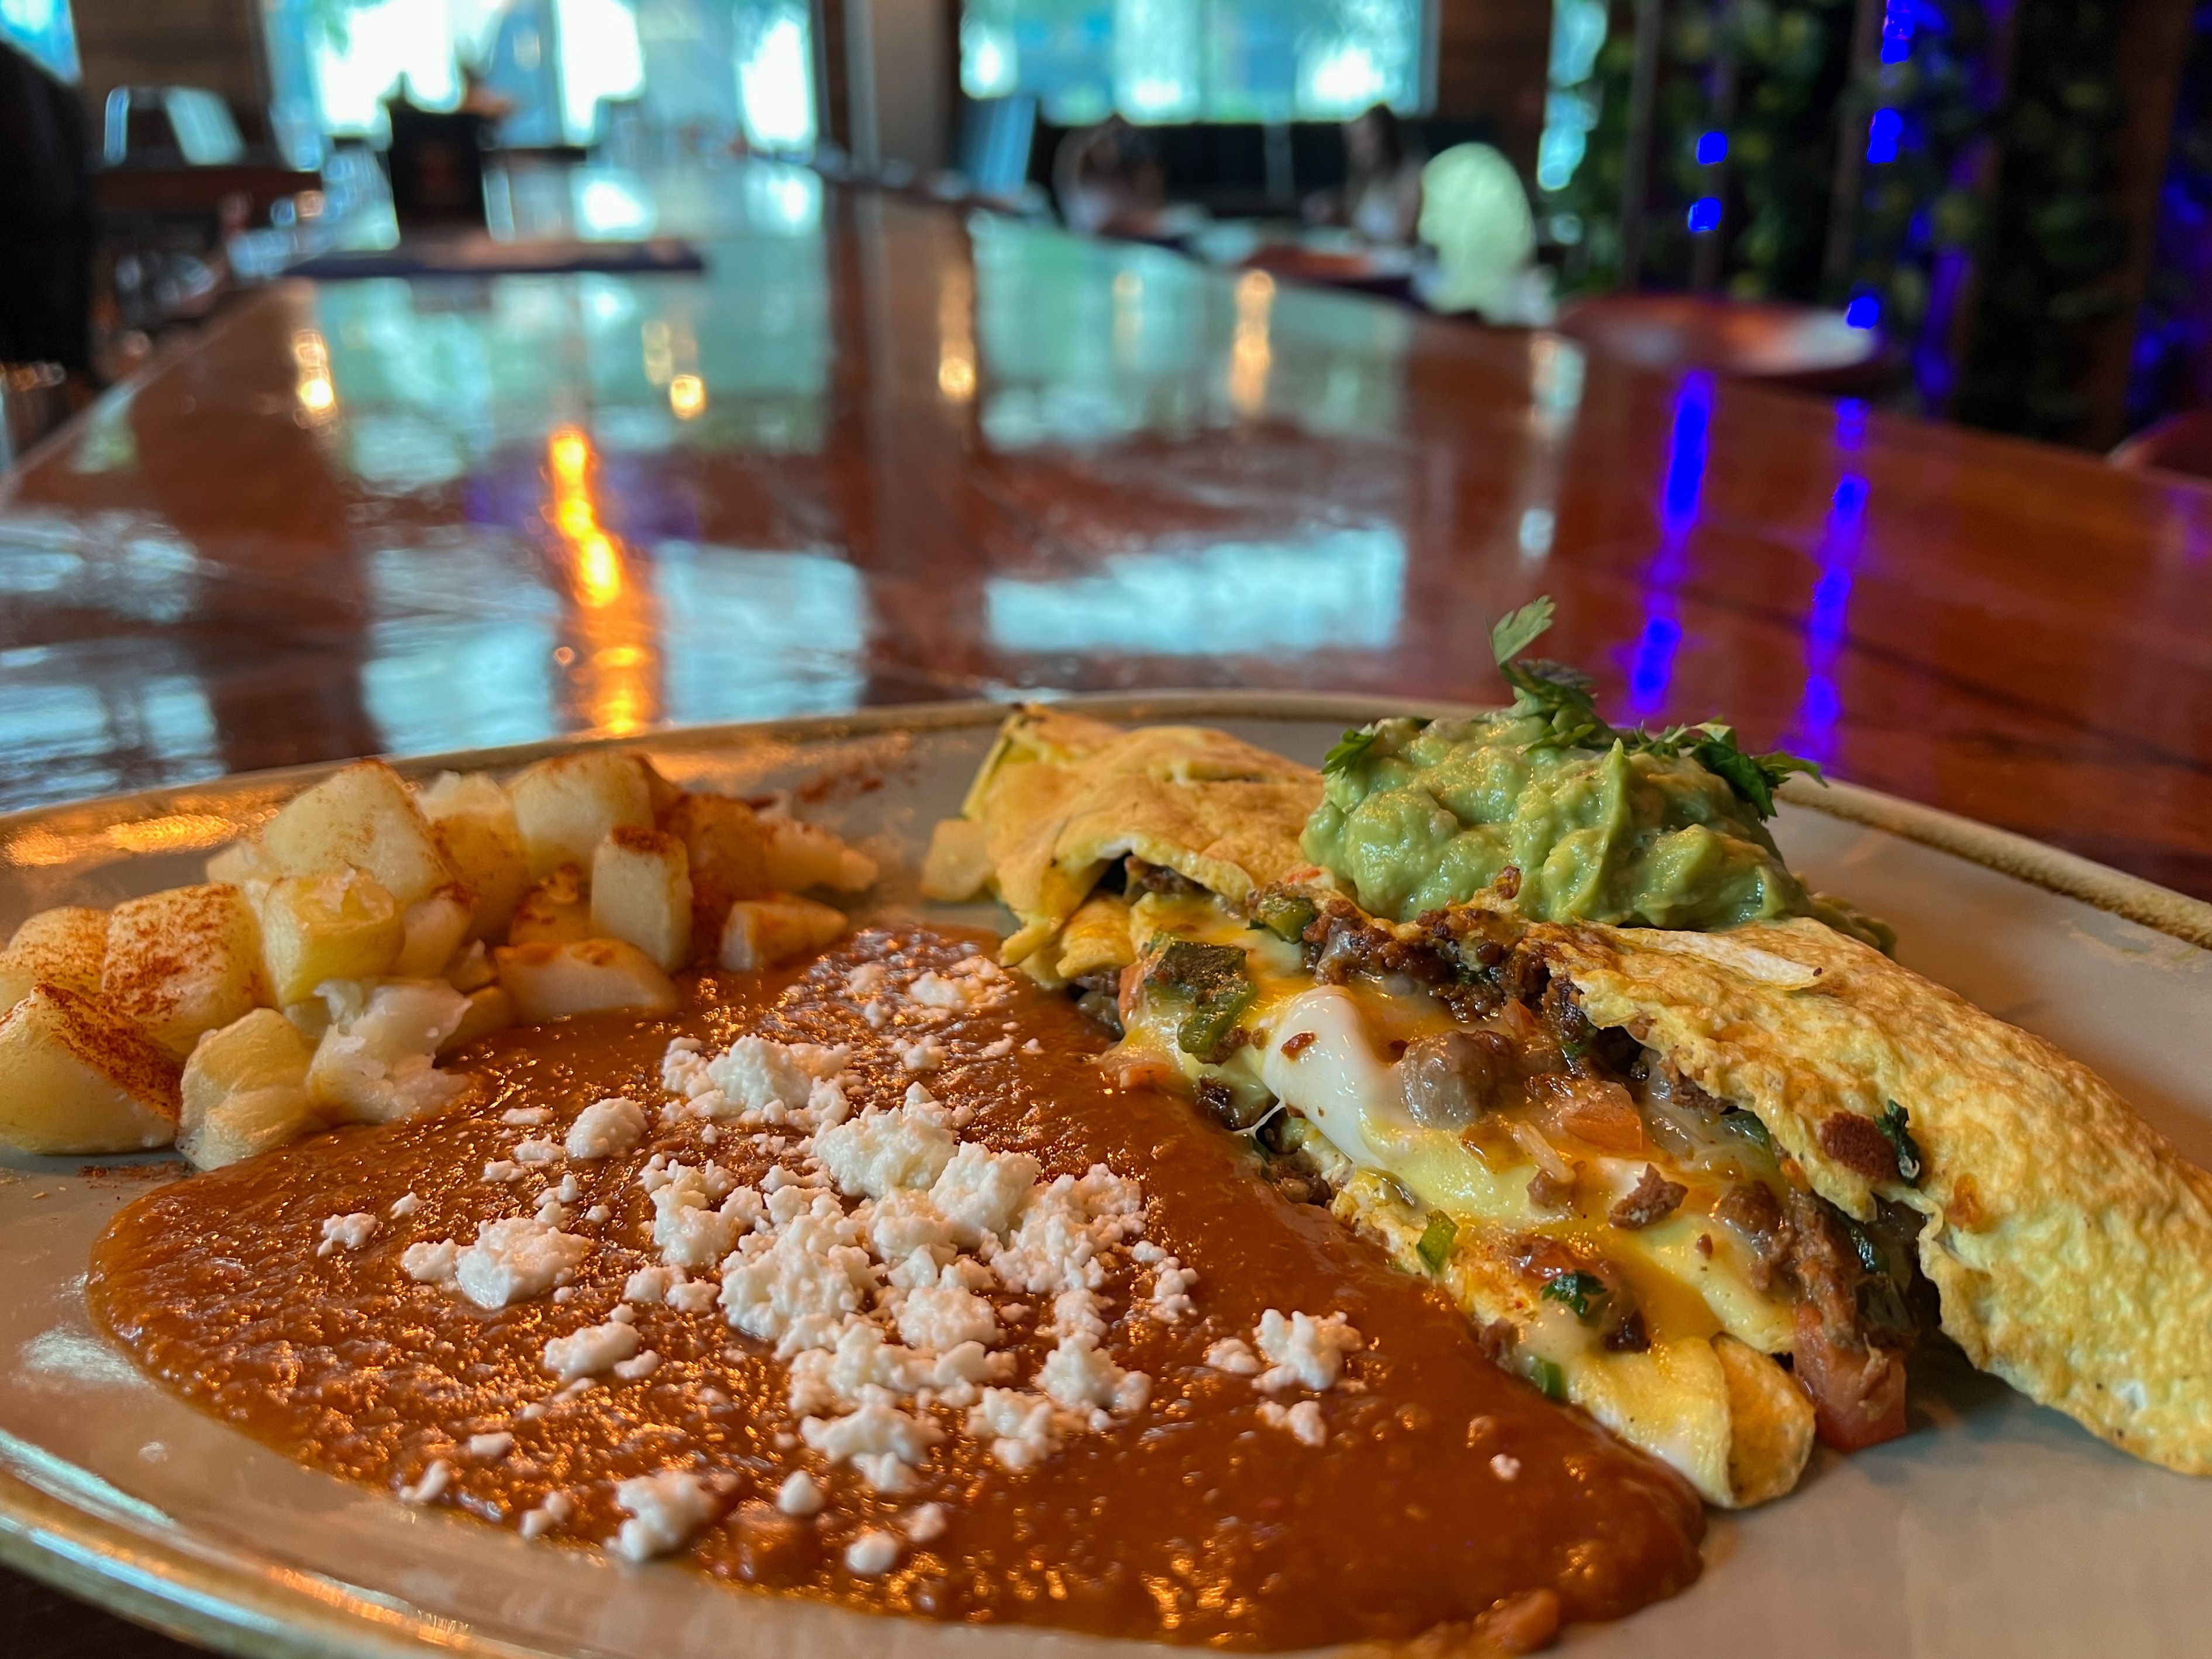 A plate featuring an omlette and salsa and cheese.